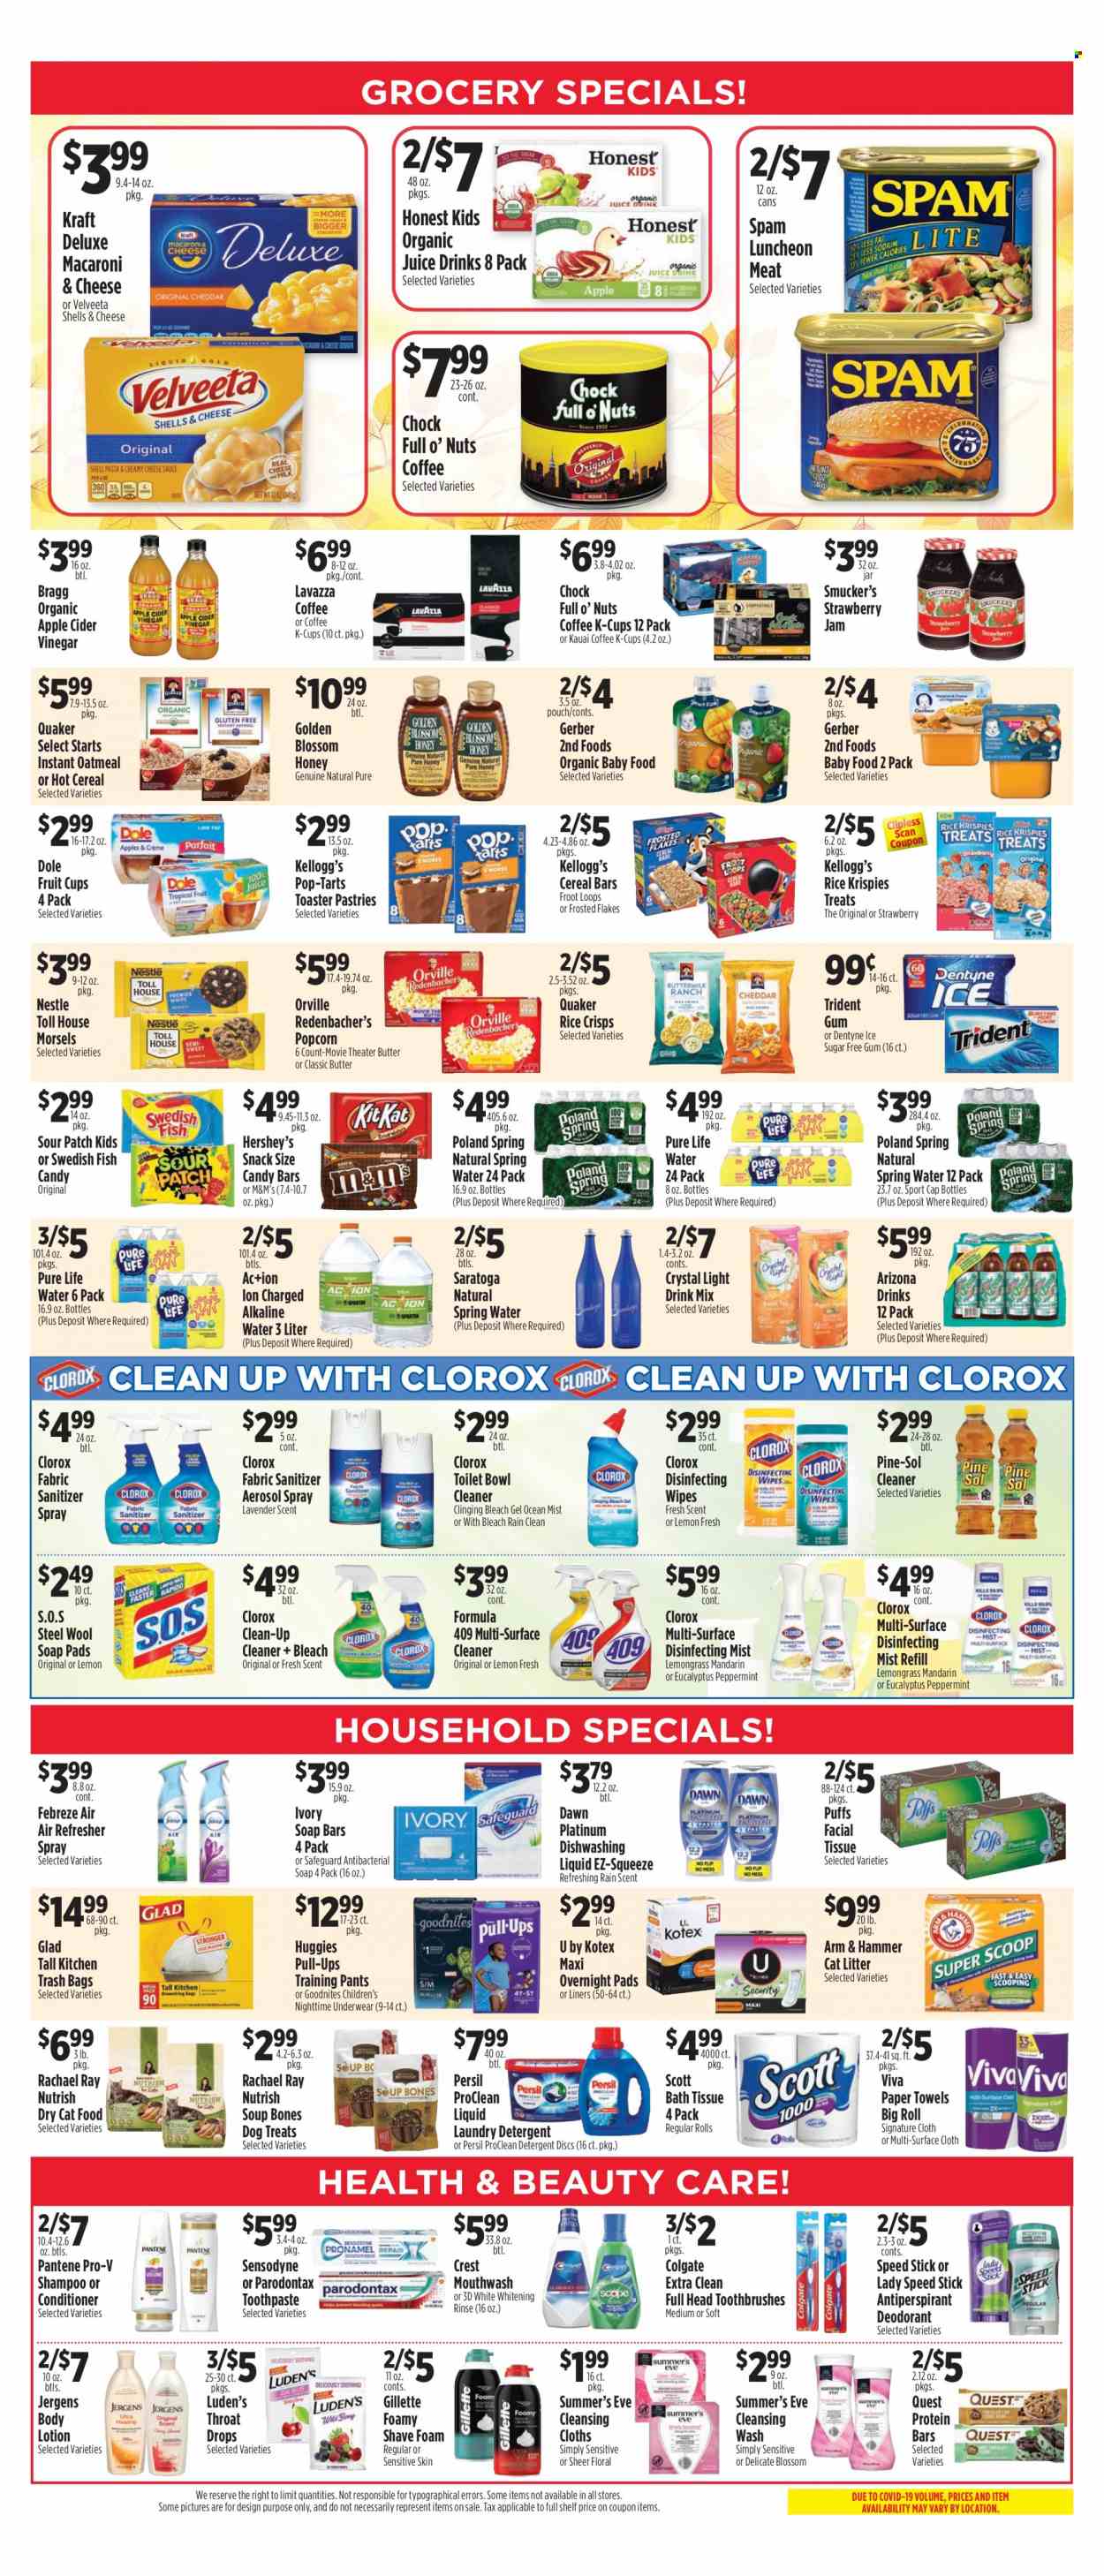 thumbnail - Pioneer Supermarkets Flyer - 09/25/2022 - 10/01/2022 - Sales products - puffs, Dole, mandarines, fruit cup, macaroni & cheese, soup, Quaker, Kraft®, Spam, lunch meat, butter, Blossom, Hershey's, Nestlé, snack, M&M's, cereal bar, Kellogg's, Trident, Pop-Tarts, Sour Patch, Gerber, popcorn, rice crisps, ARM & HAMMER, oatmeal, strawberry jam, cereals, protein bar, Rice Krispies, Frosted Flakes, apple cider vinegar, vinegar, honey, fruit jam, juice, AriZona, spring water, Pure Life Water, alkaline water, coffee, coffee capsules, K-Cups, Lavazza, organic baby food, wipes, Huggies, pants, baby pants, bath tissue, Scott, kitchen towels, paper towels, detergent, Febreze, surface cleaner, cleaner, bleach, Clorox, Pine-Sol, Persil, laundry detergent, dishwashing liquid, shampoo, antimicrobial soap, soap, Colgate, toothpaste, Sensodyne, mouthwash, Crest, sanitary pads, Kotex, conditioner, refresher, Pantene, body lotion, Jergens, Gillette. Page 3.